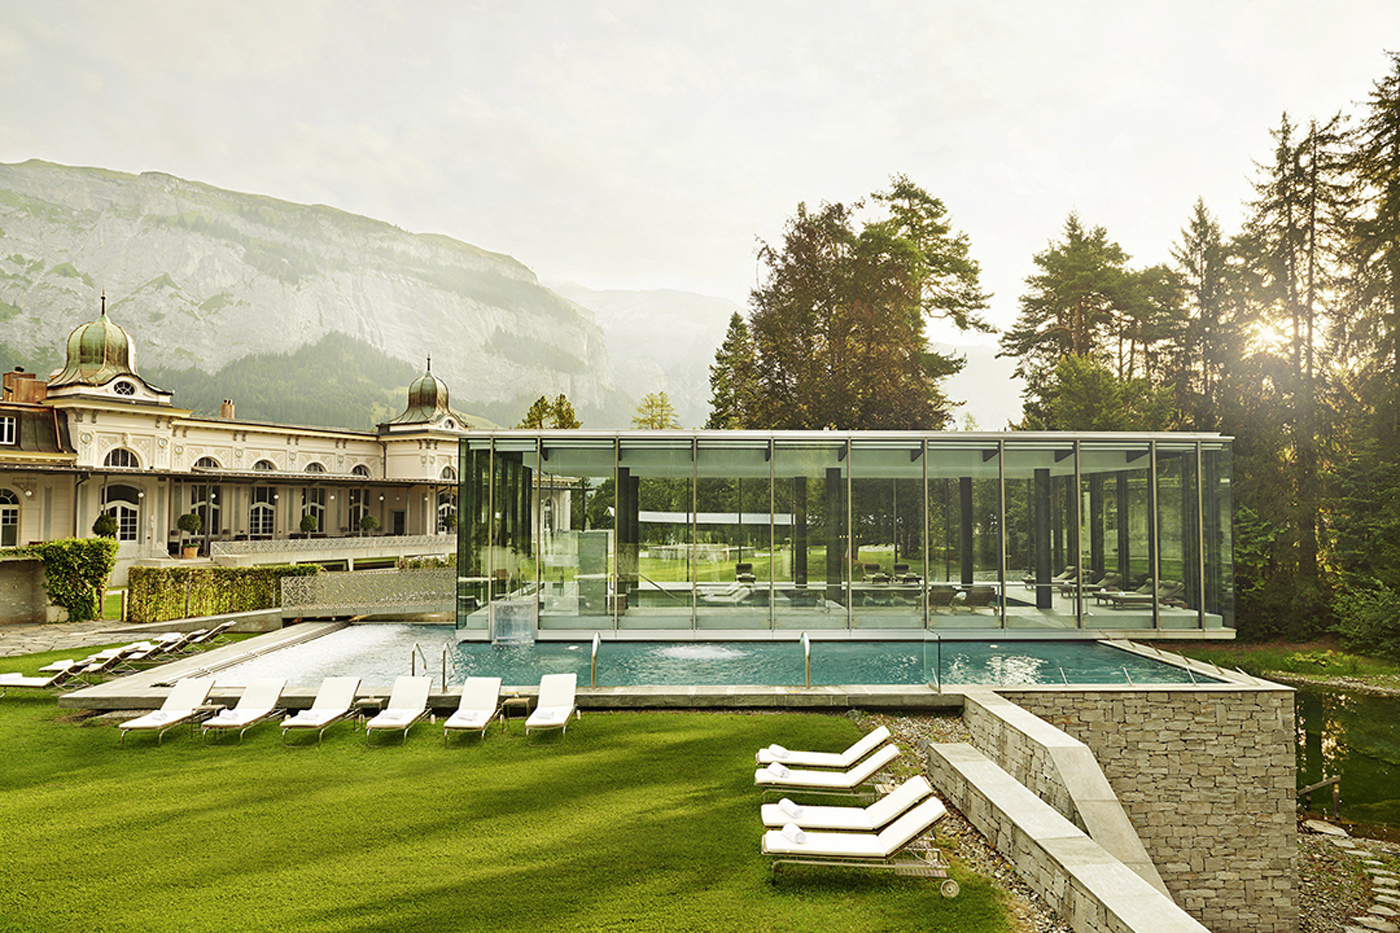 resort ground view of Belle Époque pavilion, Waldhaus Spa, Swiss alp mountains, trees and clear sky, indoor pool, outdoor pool, sun loungers on green grass